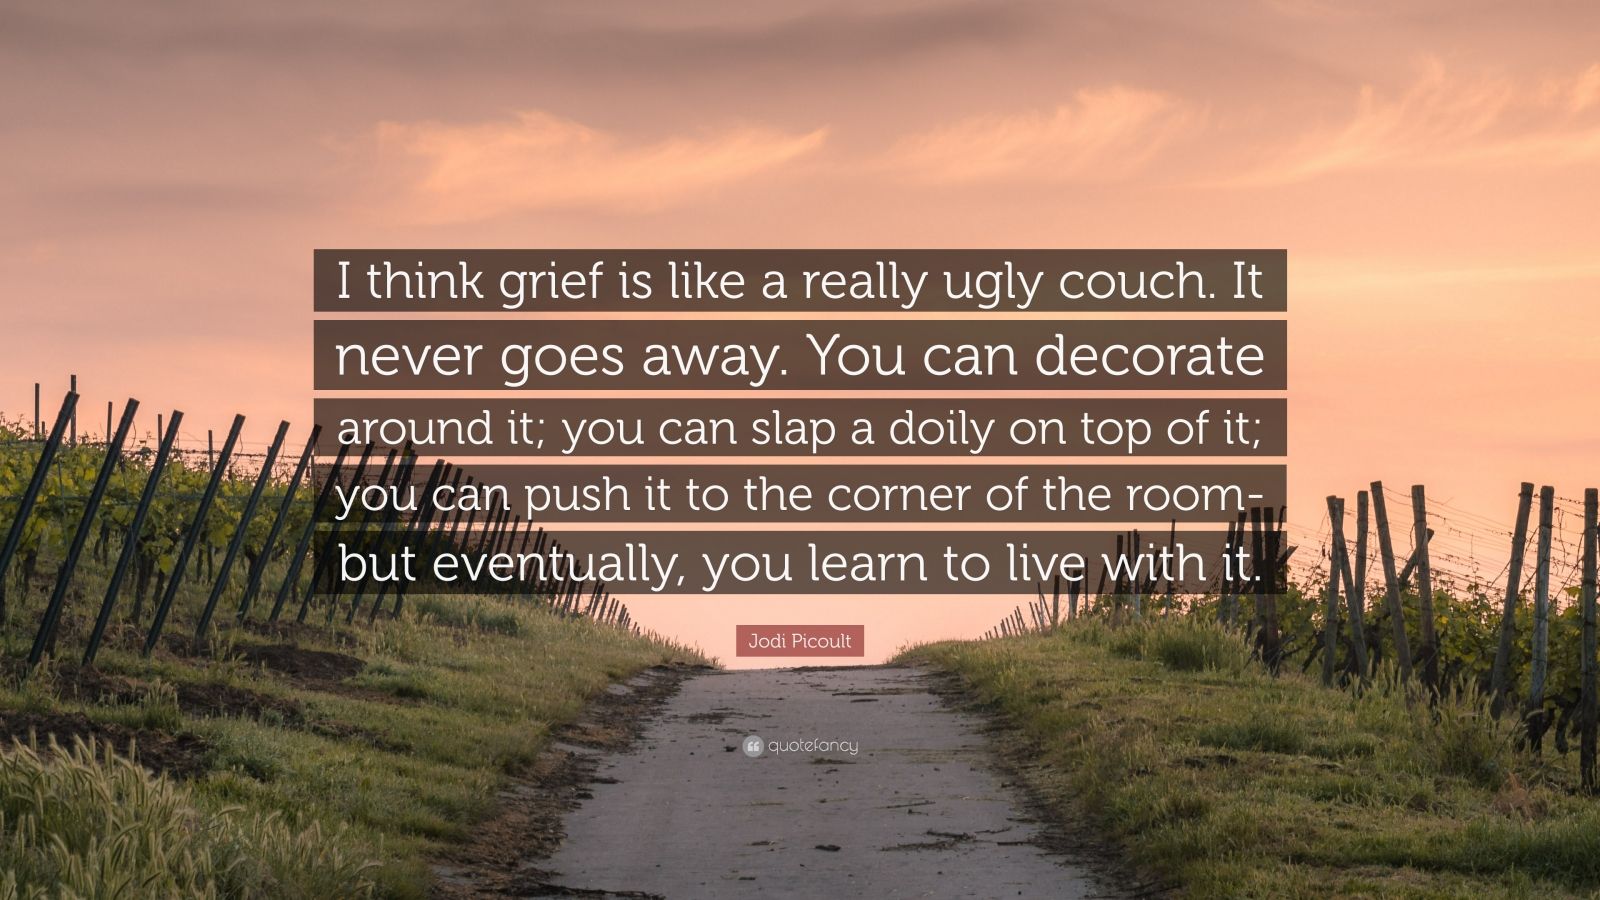 Jodi Picoult Quote: “I think grief is like a really ugly couch. It ...